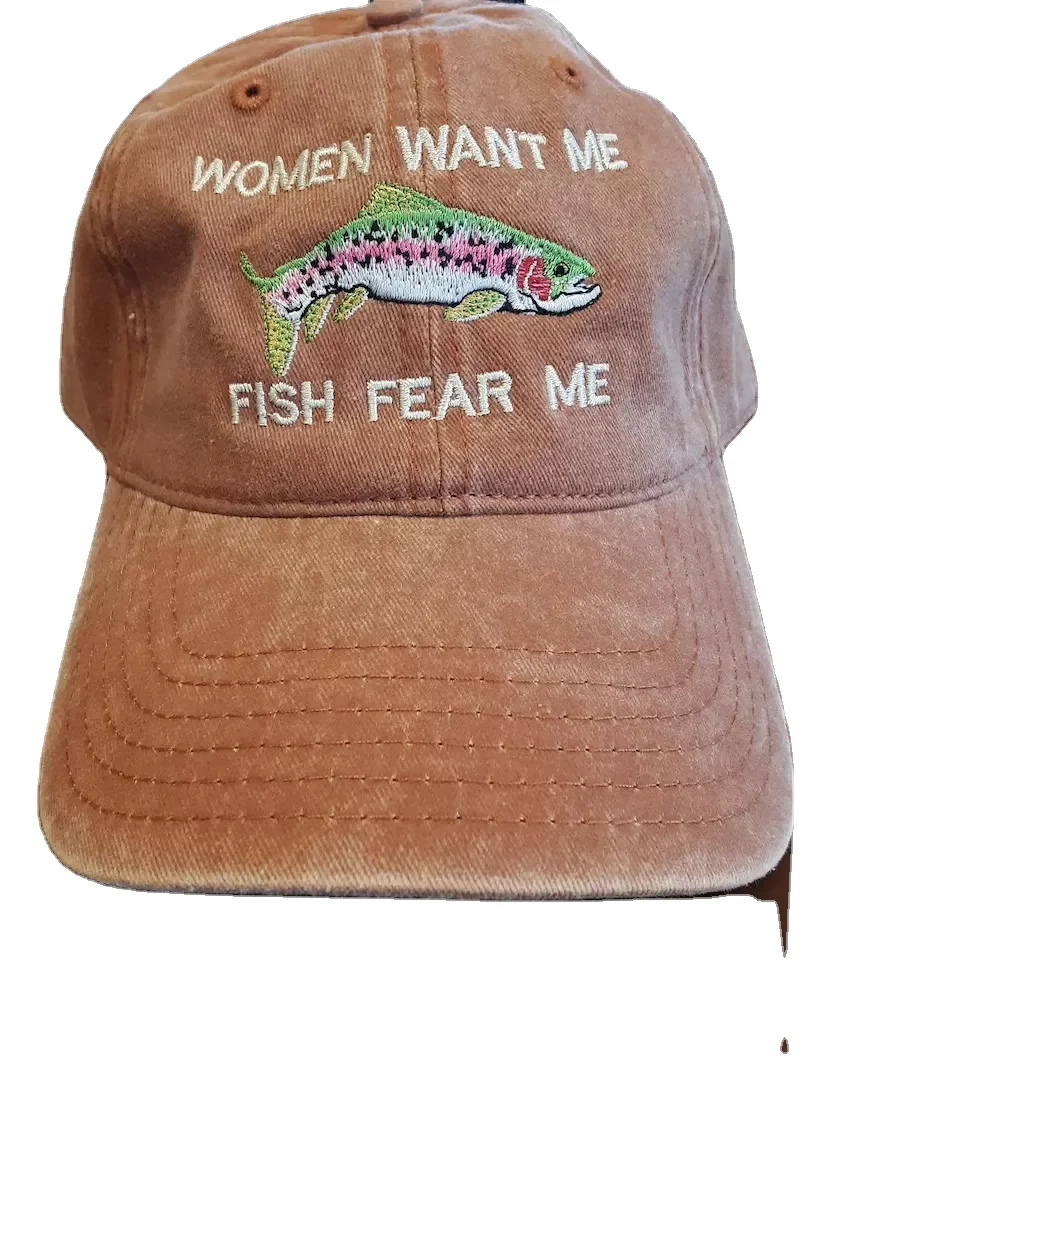 Women Fear Me Fish Want Me Embroidered Vintage Cotton Twill Cap